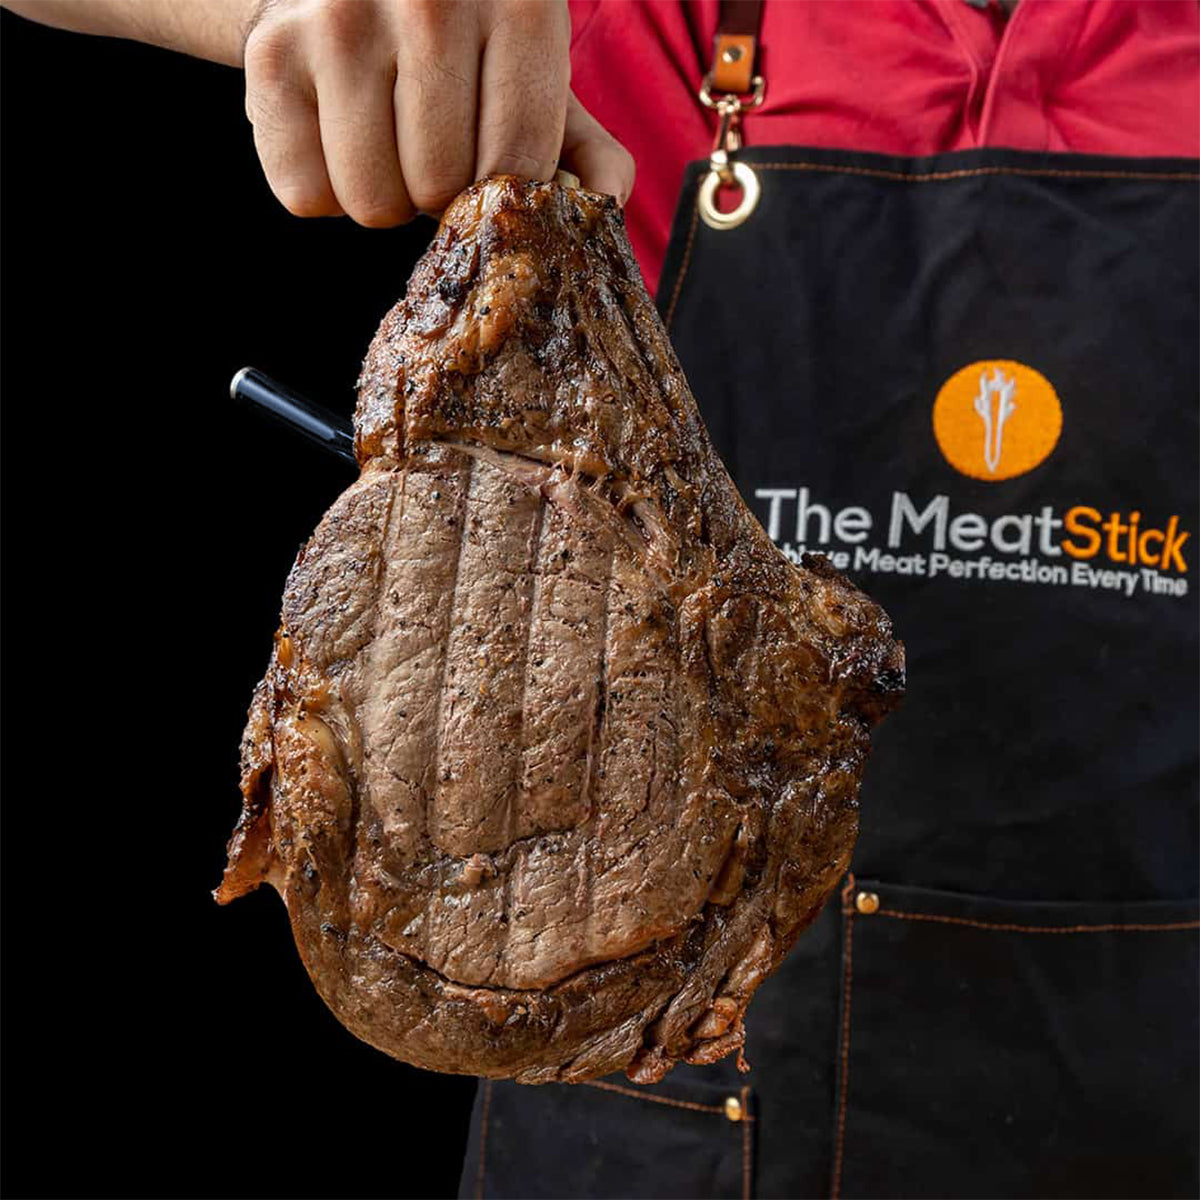 The MeatStick Set: True Wireless Meat Thermometer up to 30 Ft Range 